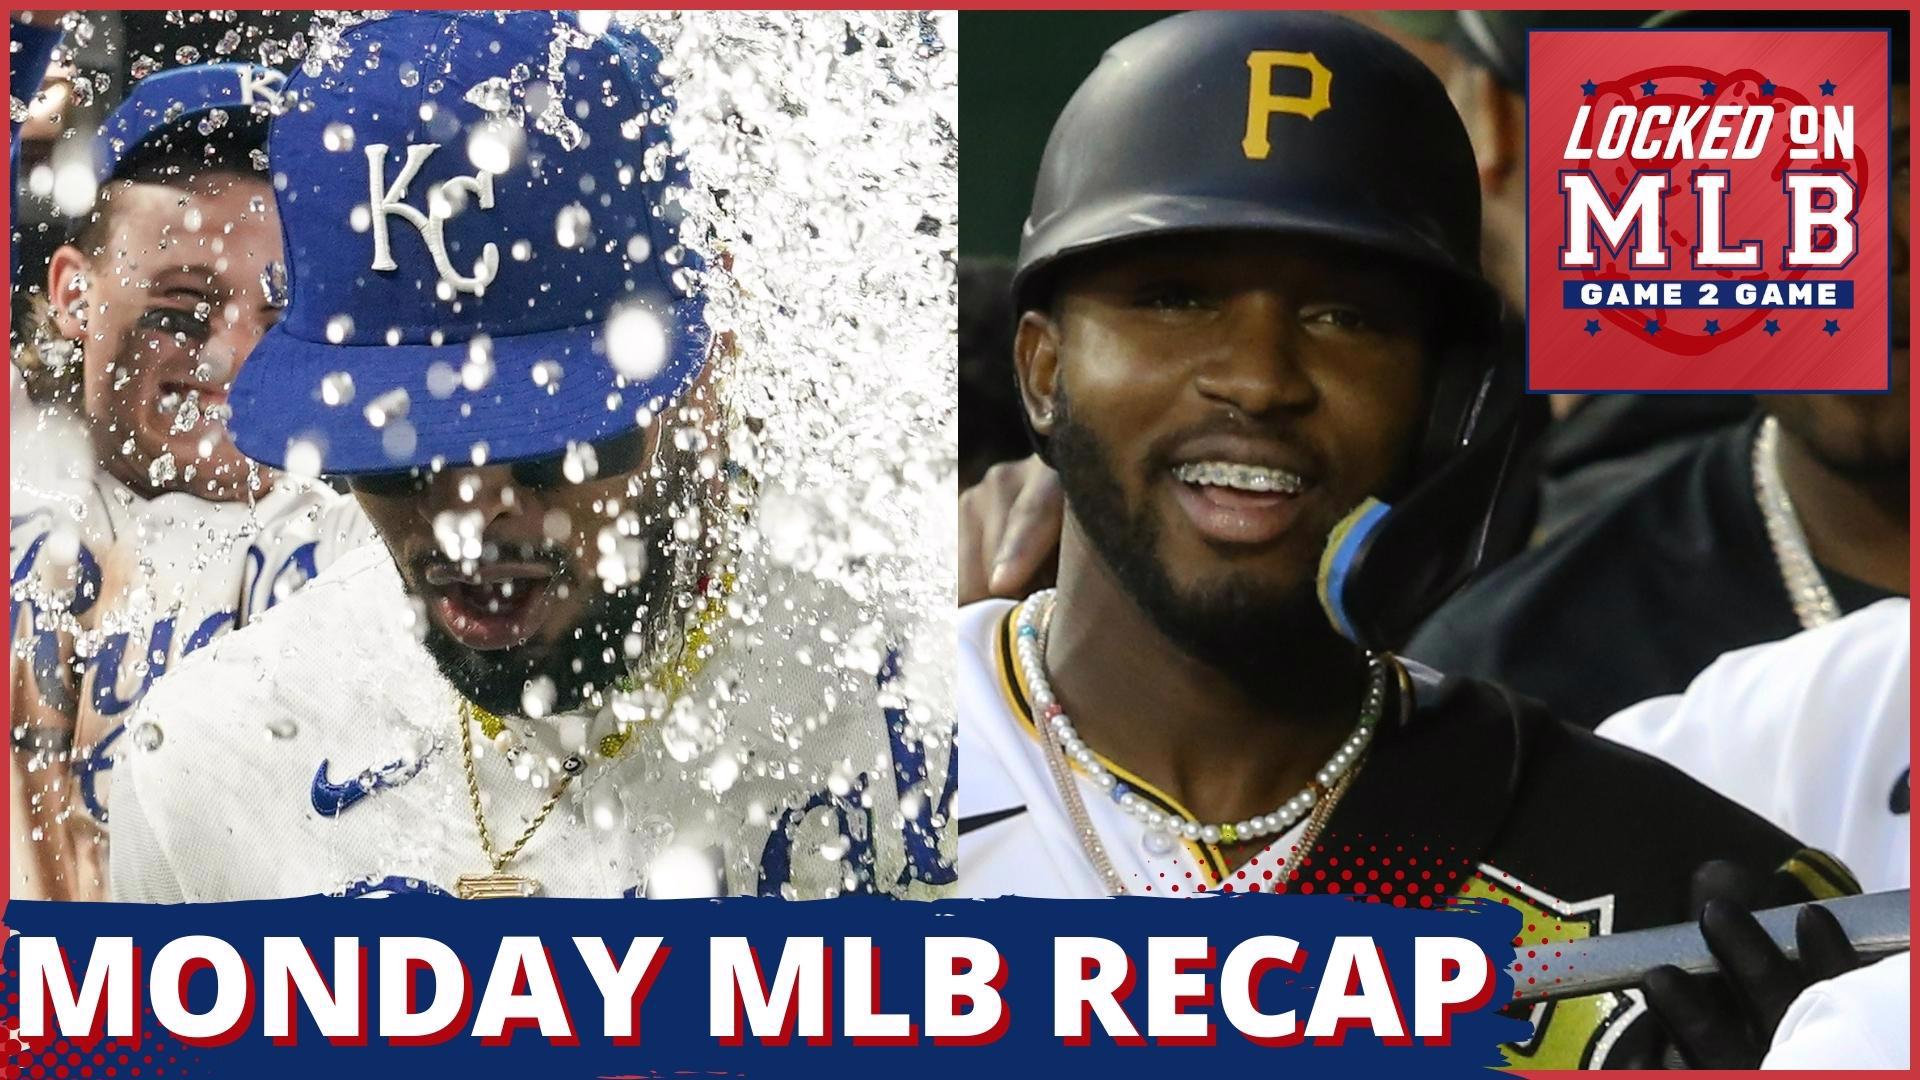 The latest in the MLB from the Pirates shutting out the Rockies to the homerun that gave the Yankees a win.